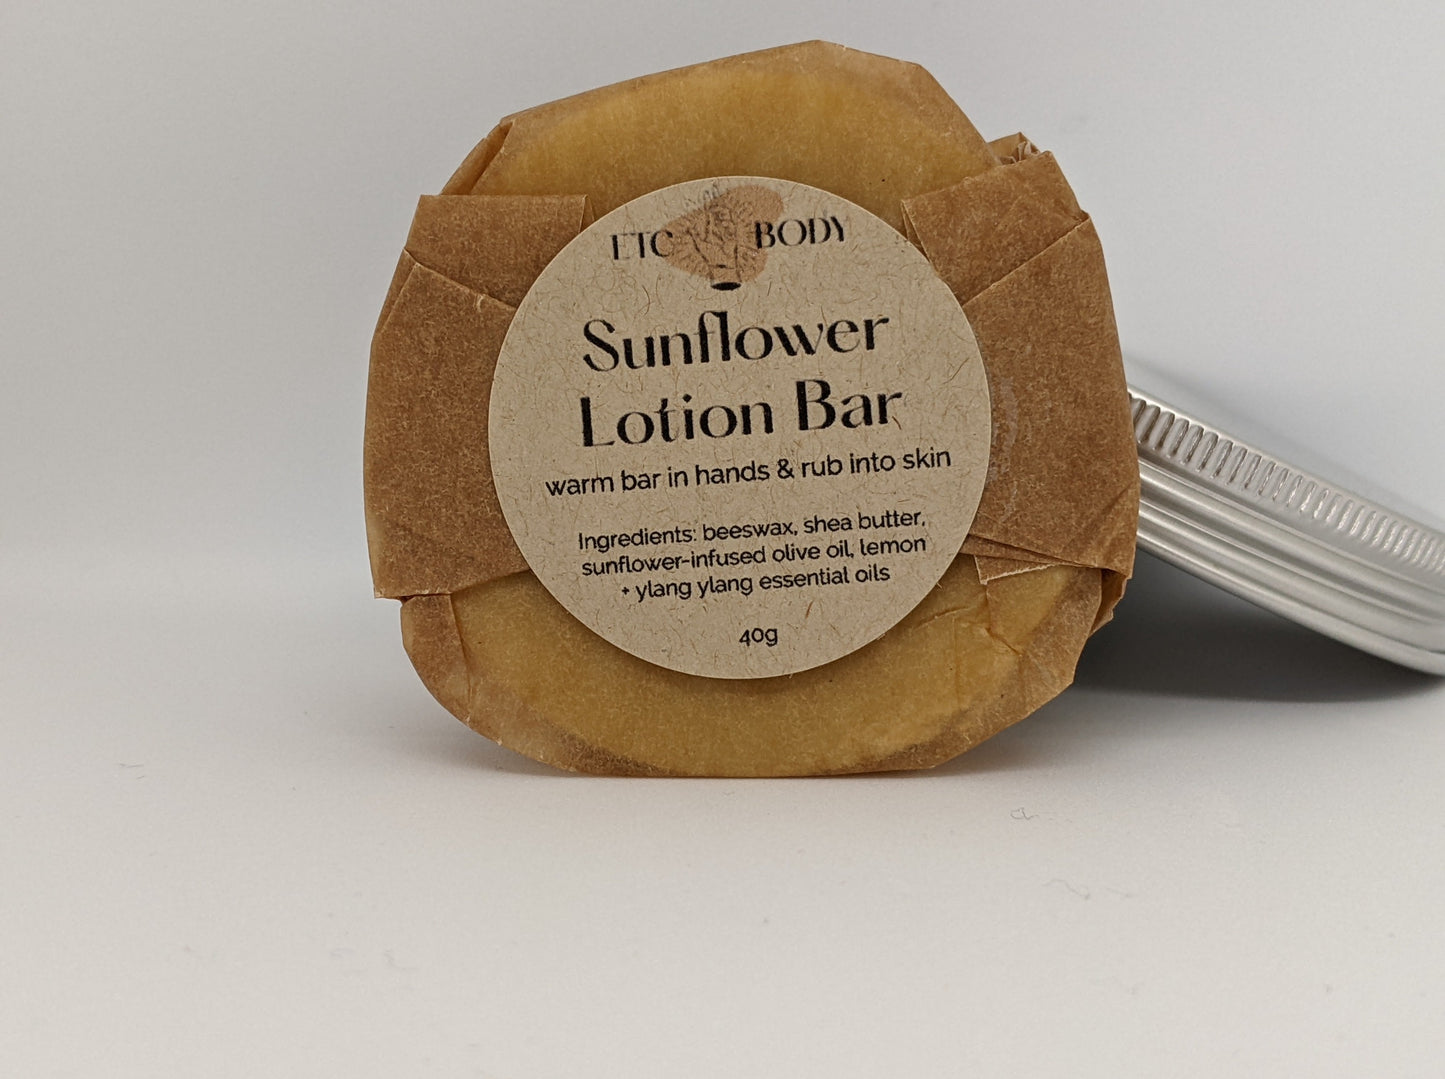 Sunflower Lotion bar with sunflower-infused olive oil. Warm bar in hands & rub into skin.